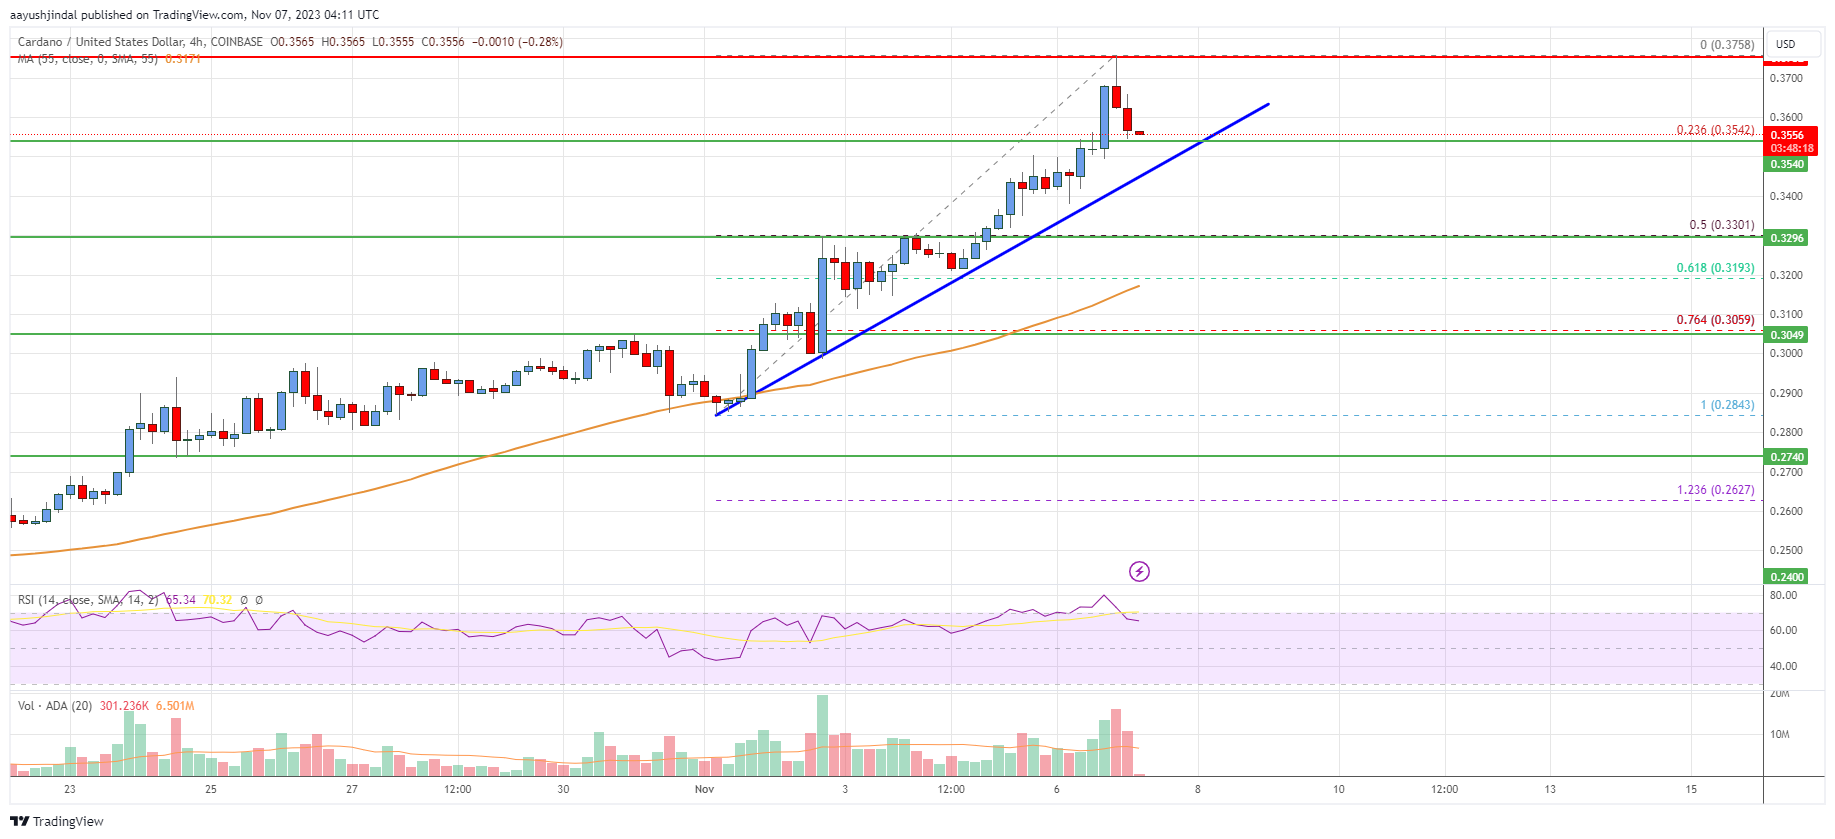 Cardano (ADA) Price Analysis: Rally Is Just Getting Started | Live Bitcoin News